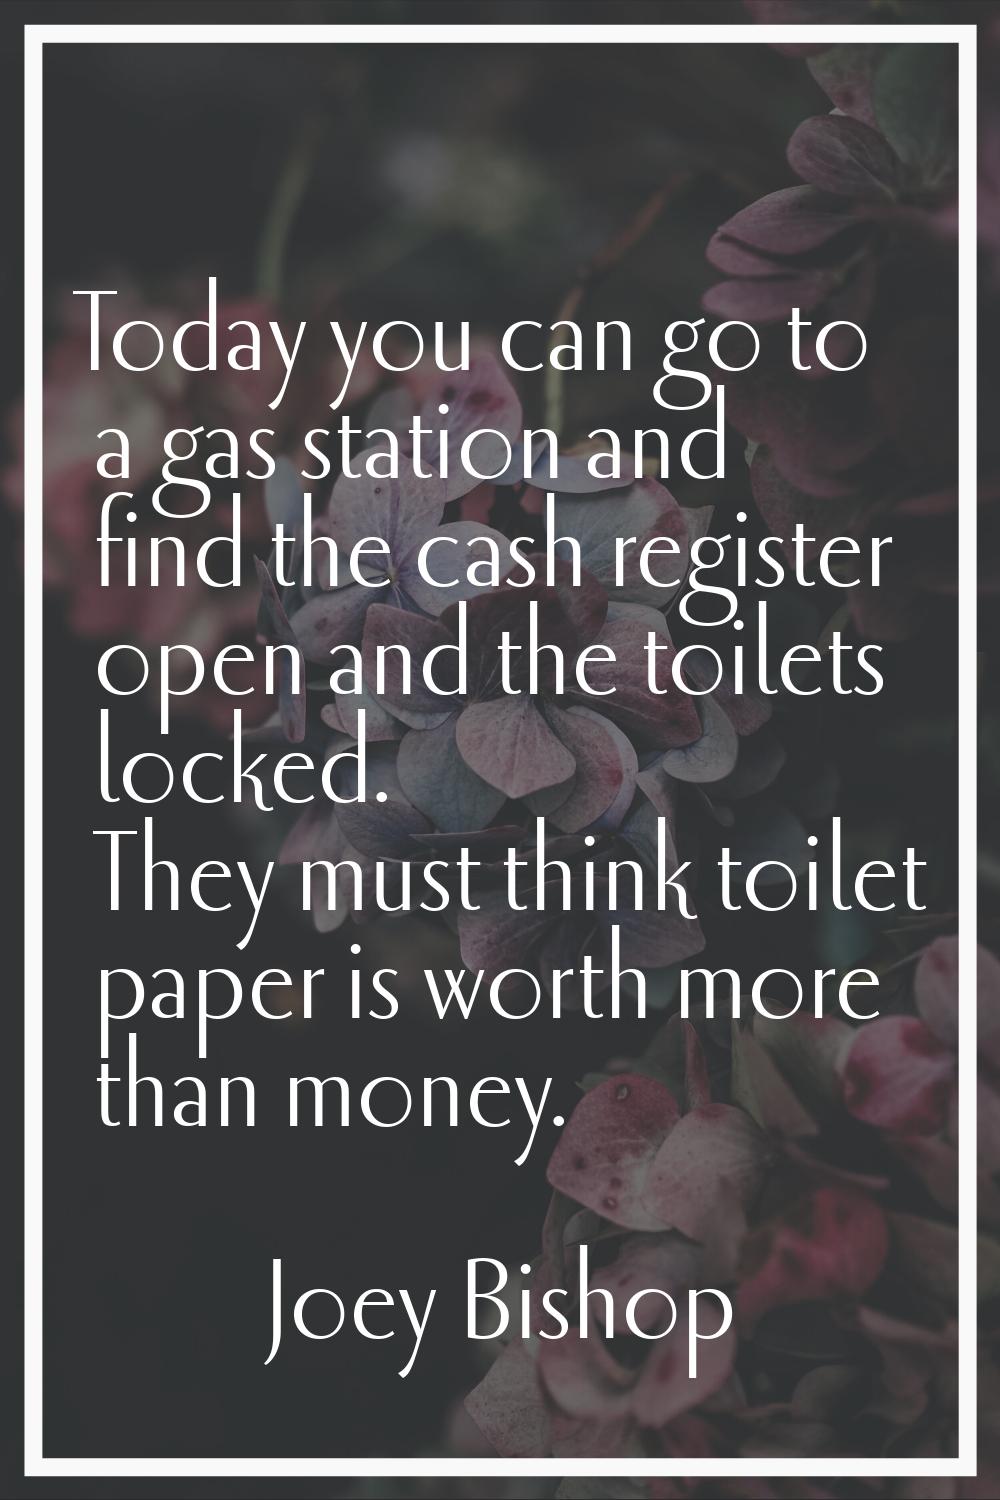 Today you can go to a gas station and find the cash register open and the toilets locked. They must